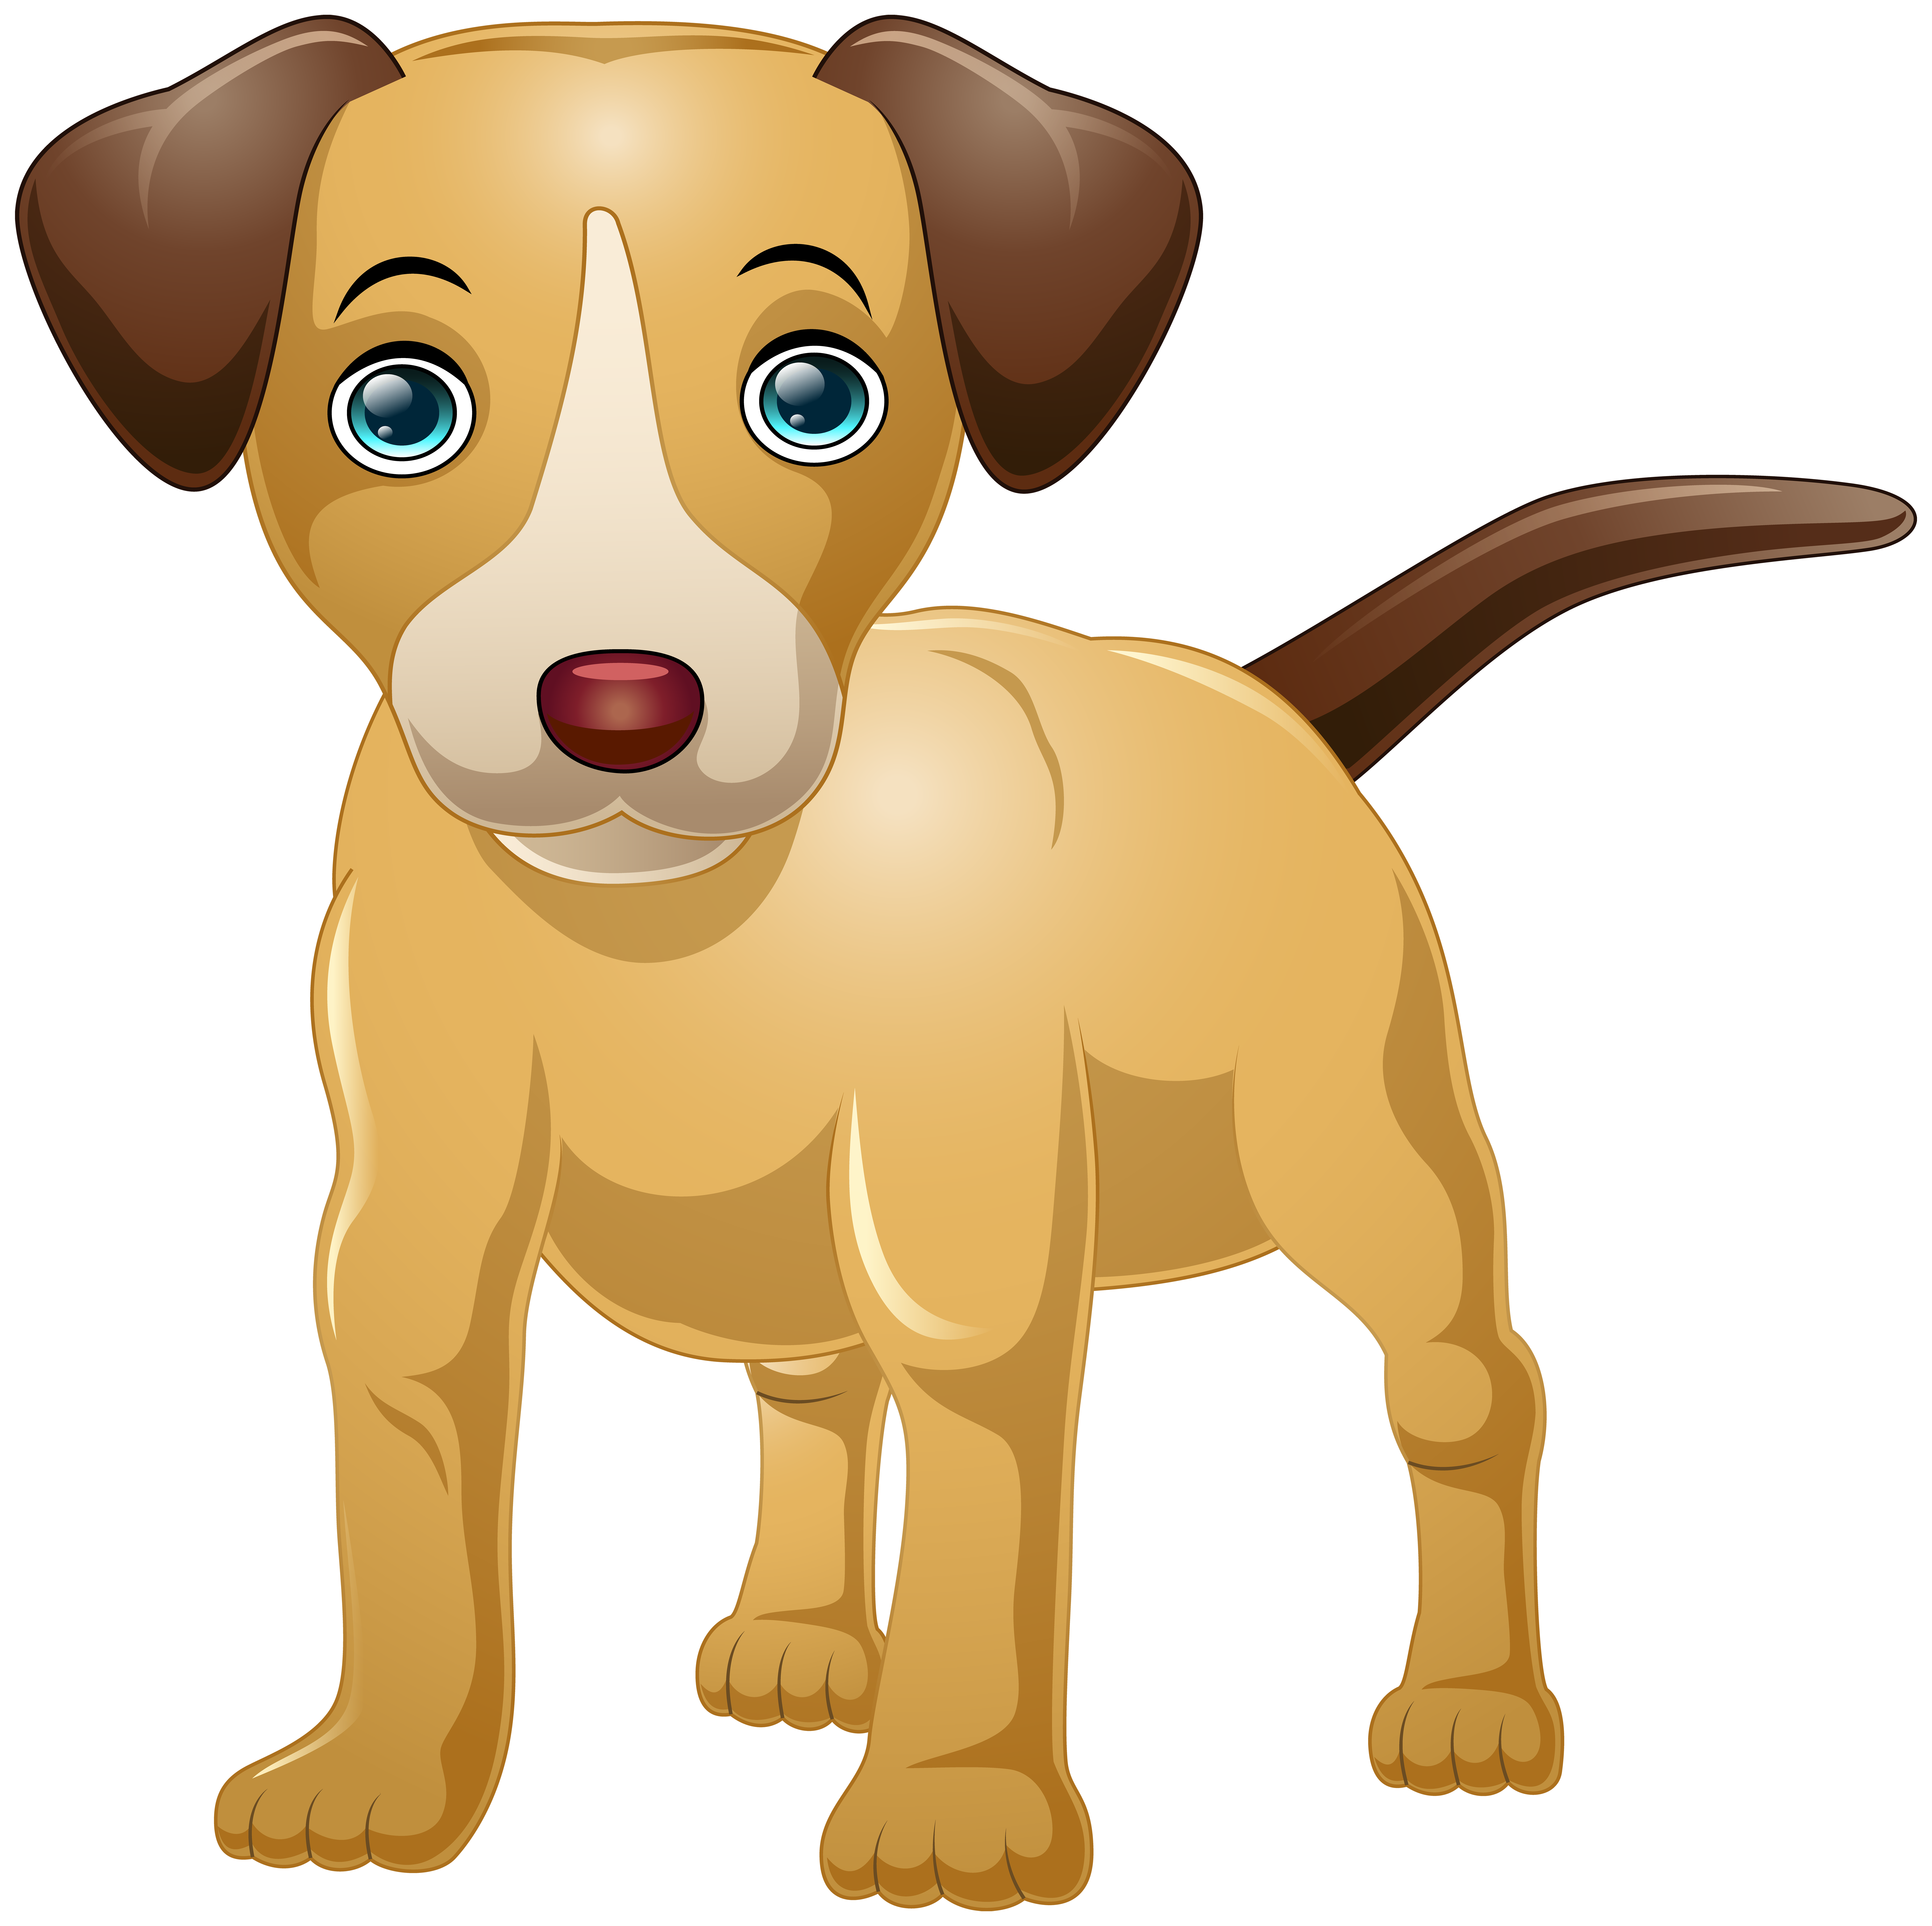 [PORTABLE] Download 21 Animated-dog-wallpapers Cute-Cartoon-Dog